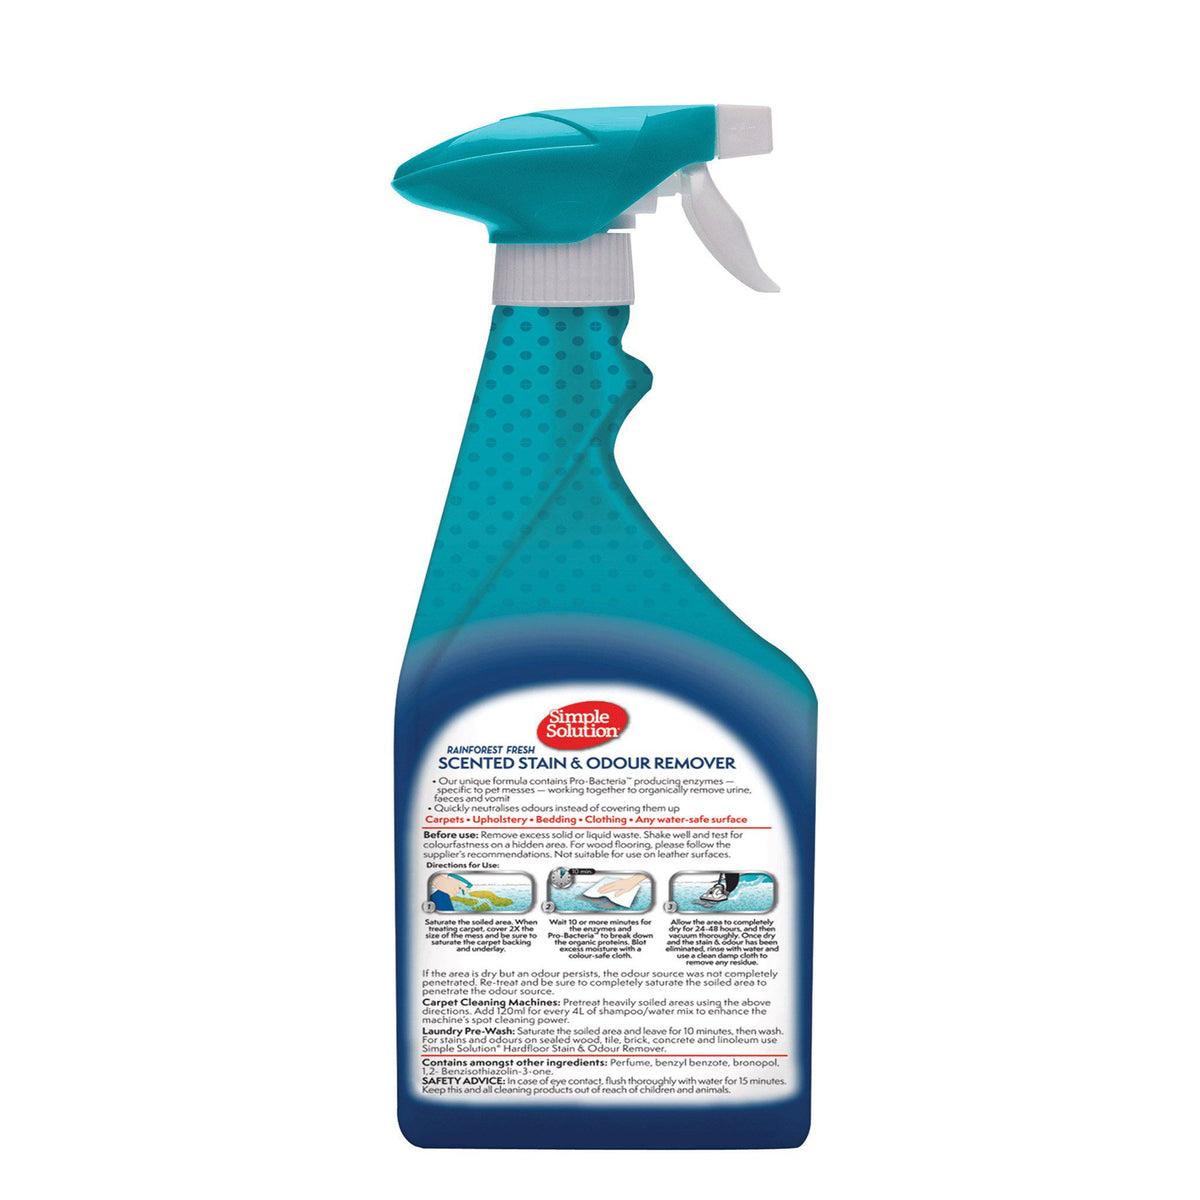 Simple Solution Dog Stain &amp; Odour Remover 750ml - Rain Forest - ComfyPet Products